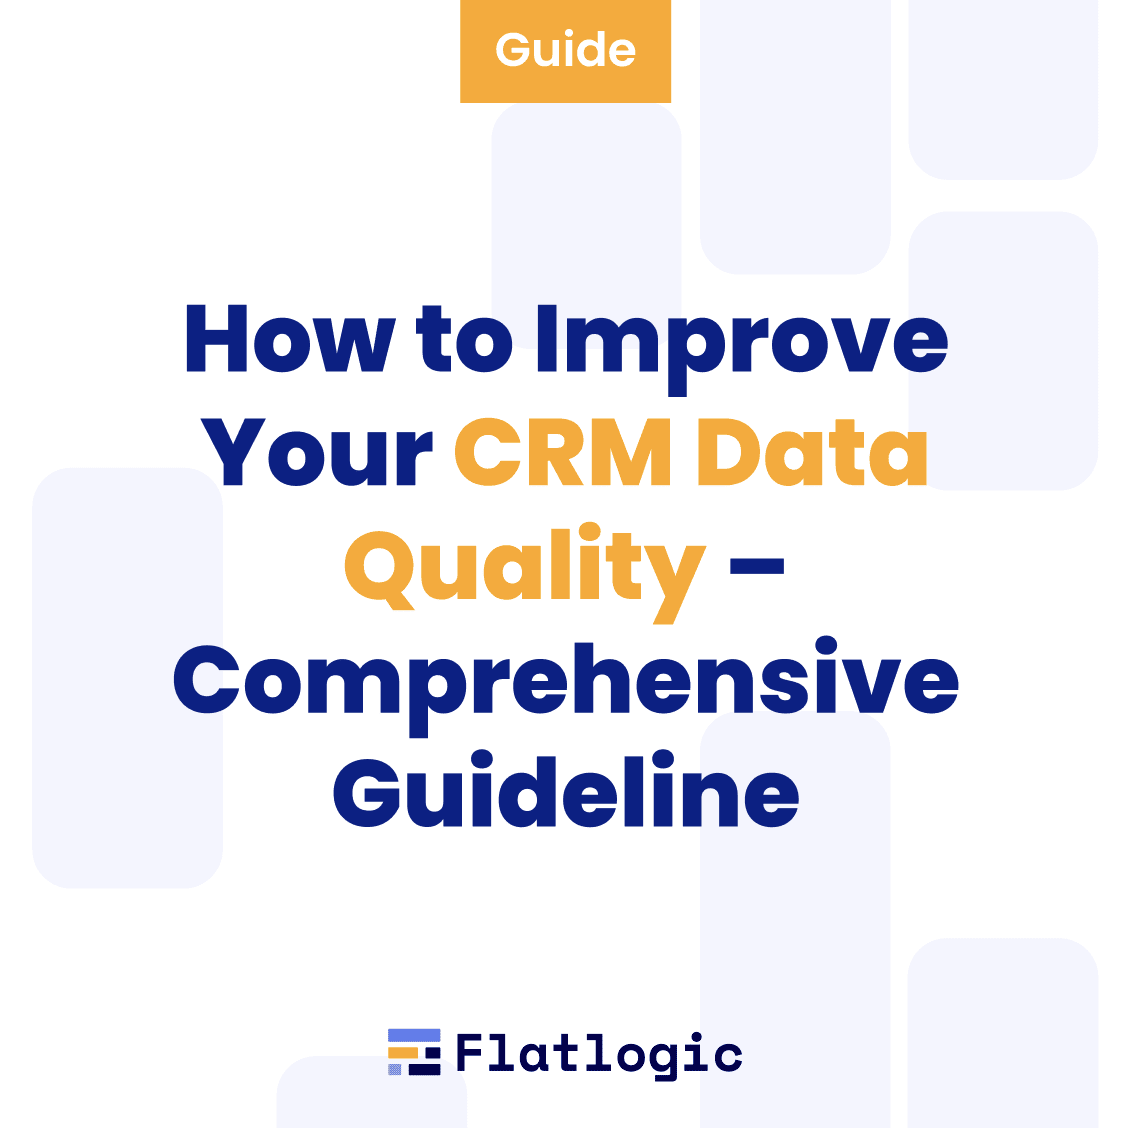 How to Improve Your CRM Data Quality